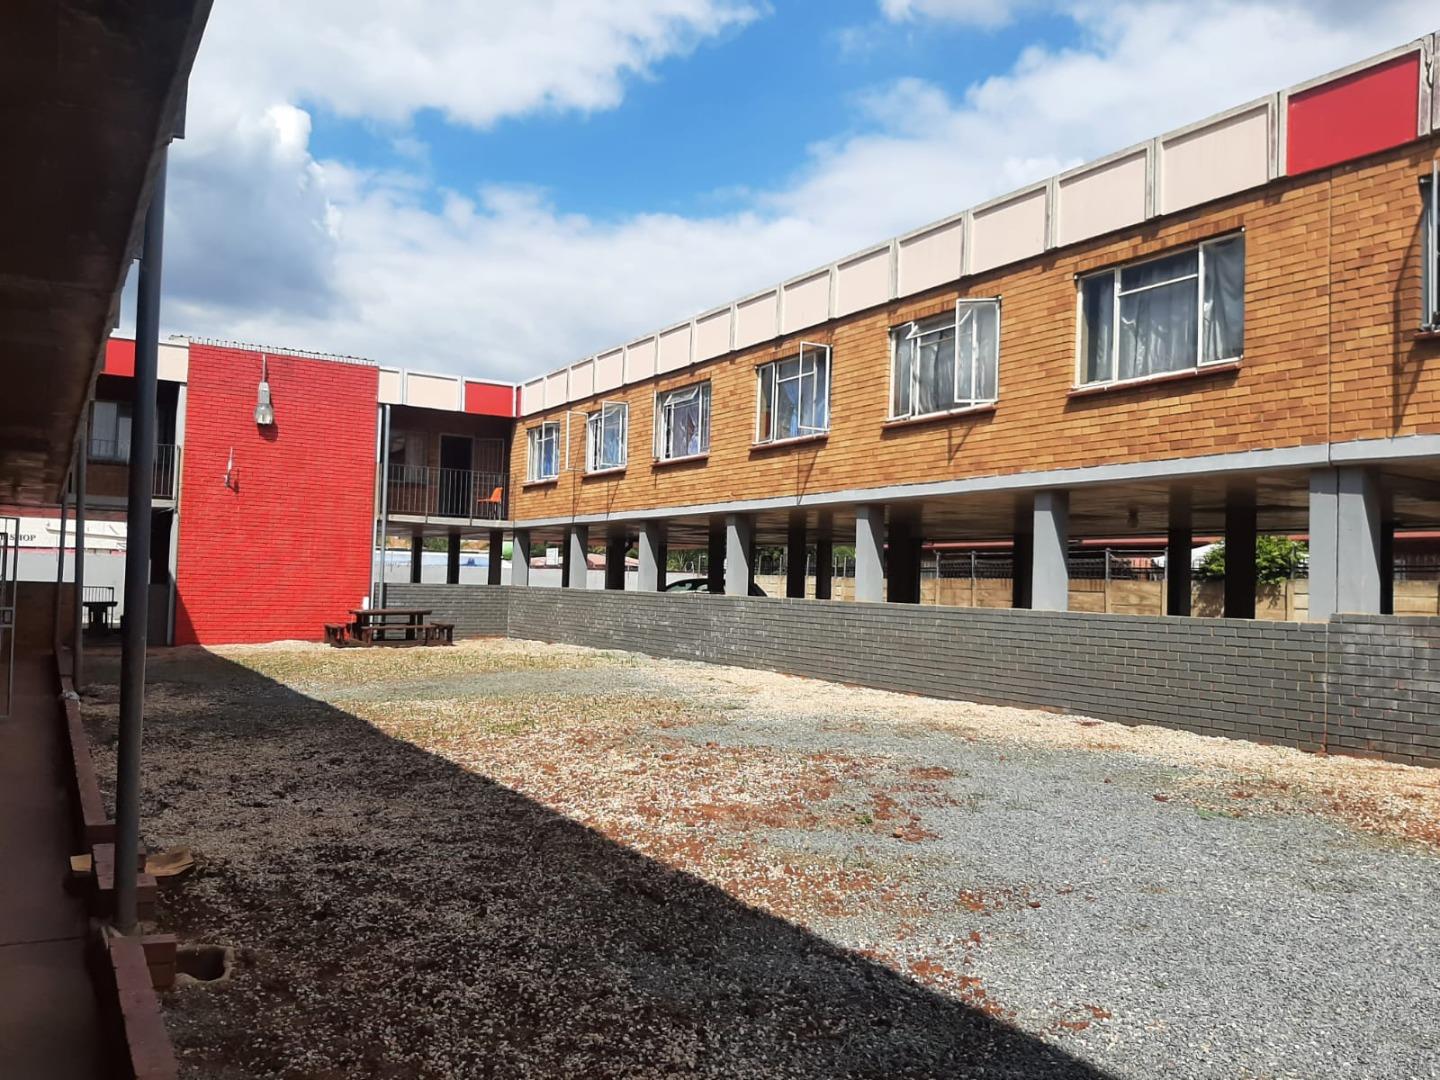 2 Bedroom Student Accommodation for Sale - Gauteng